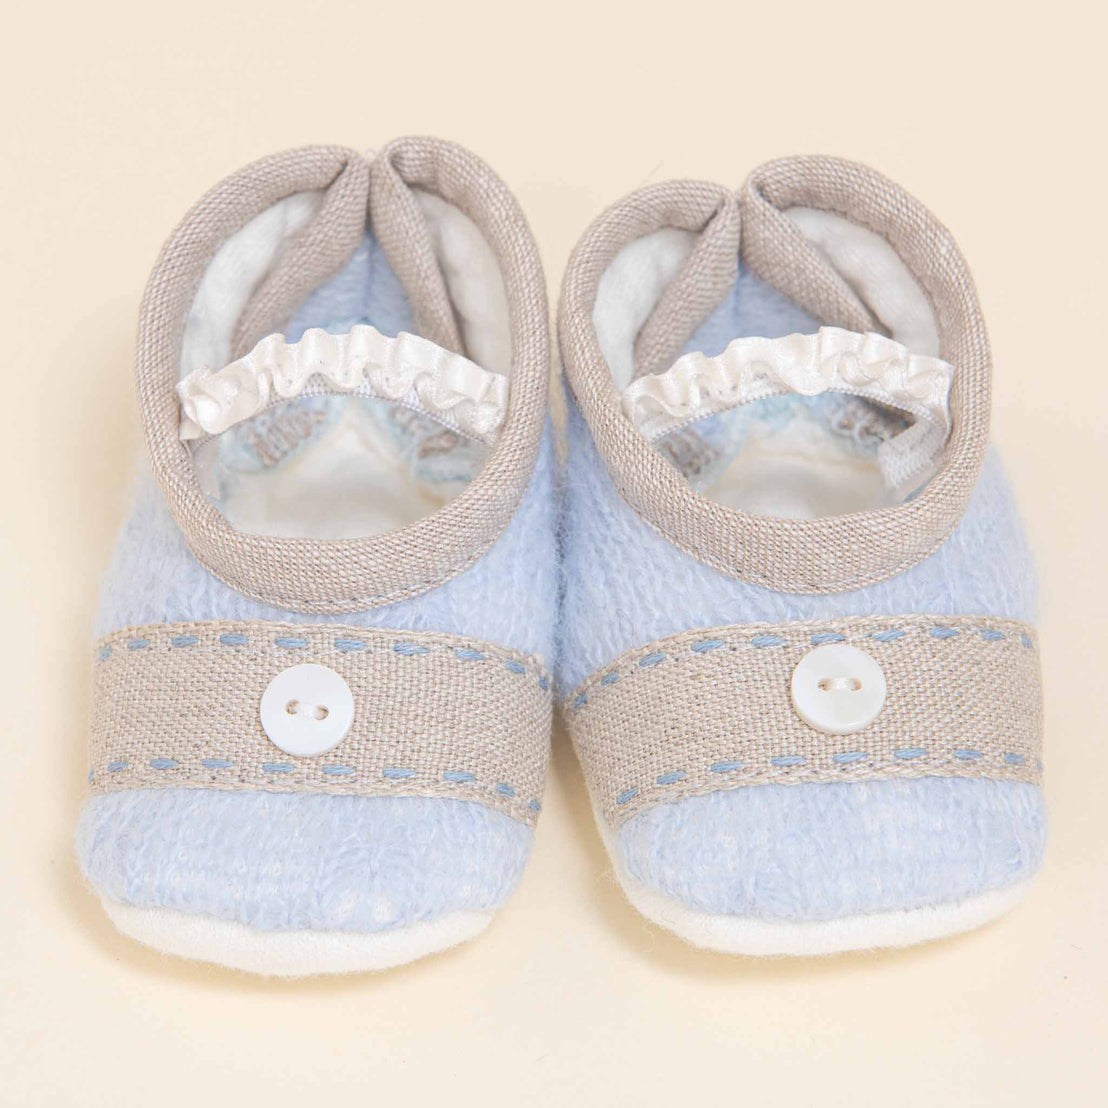 A pair of Austin Booties with blue tops and a white button on each, displayed on a light beige background.